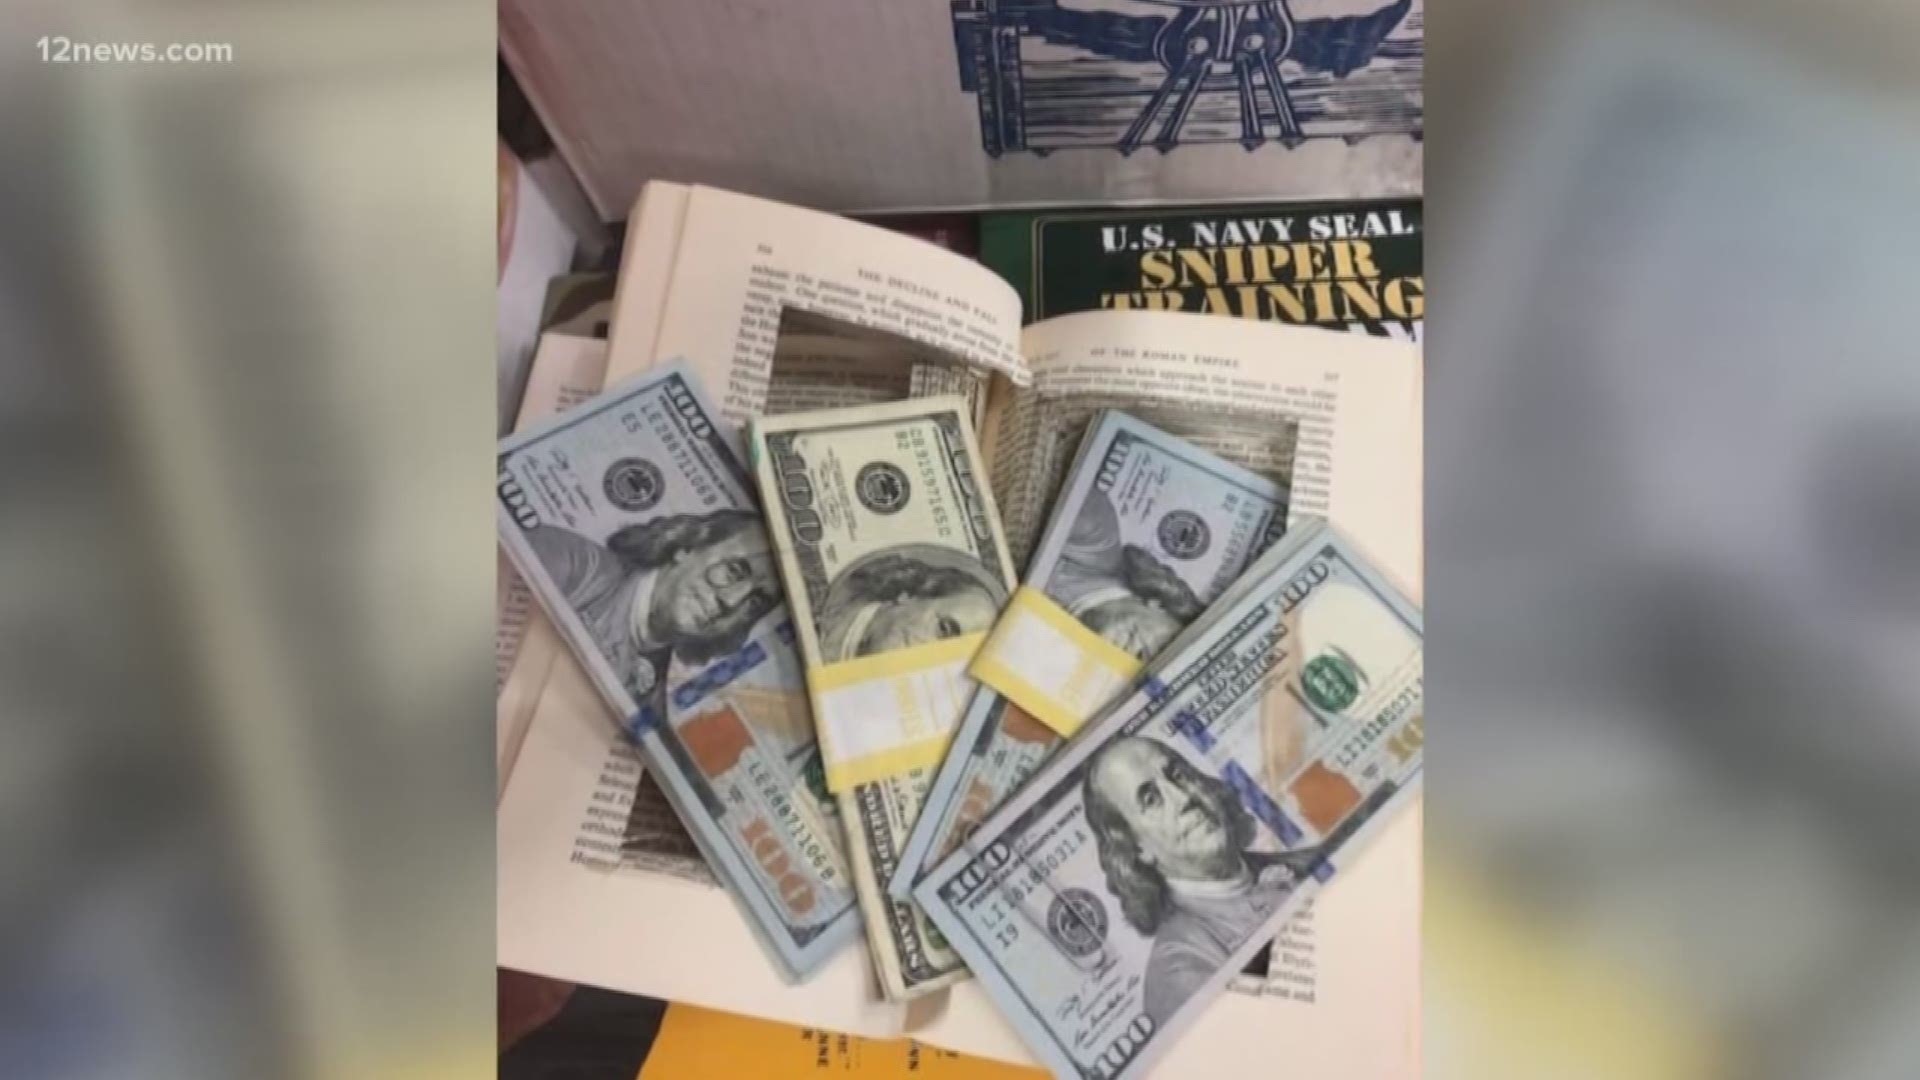 Hidden among a half million books was $4,000, and VNSA volunteer Cathy McAllister was the lucky one to find it. Someone had taken an Exacto knife to a donated book with the money inside. Luckily, the owner's address was with the book and the money was returned.